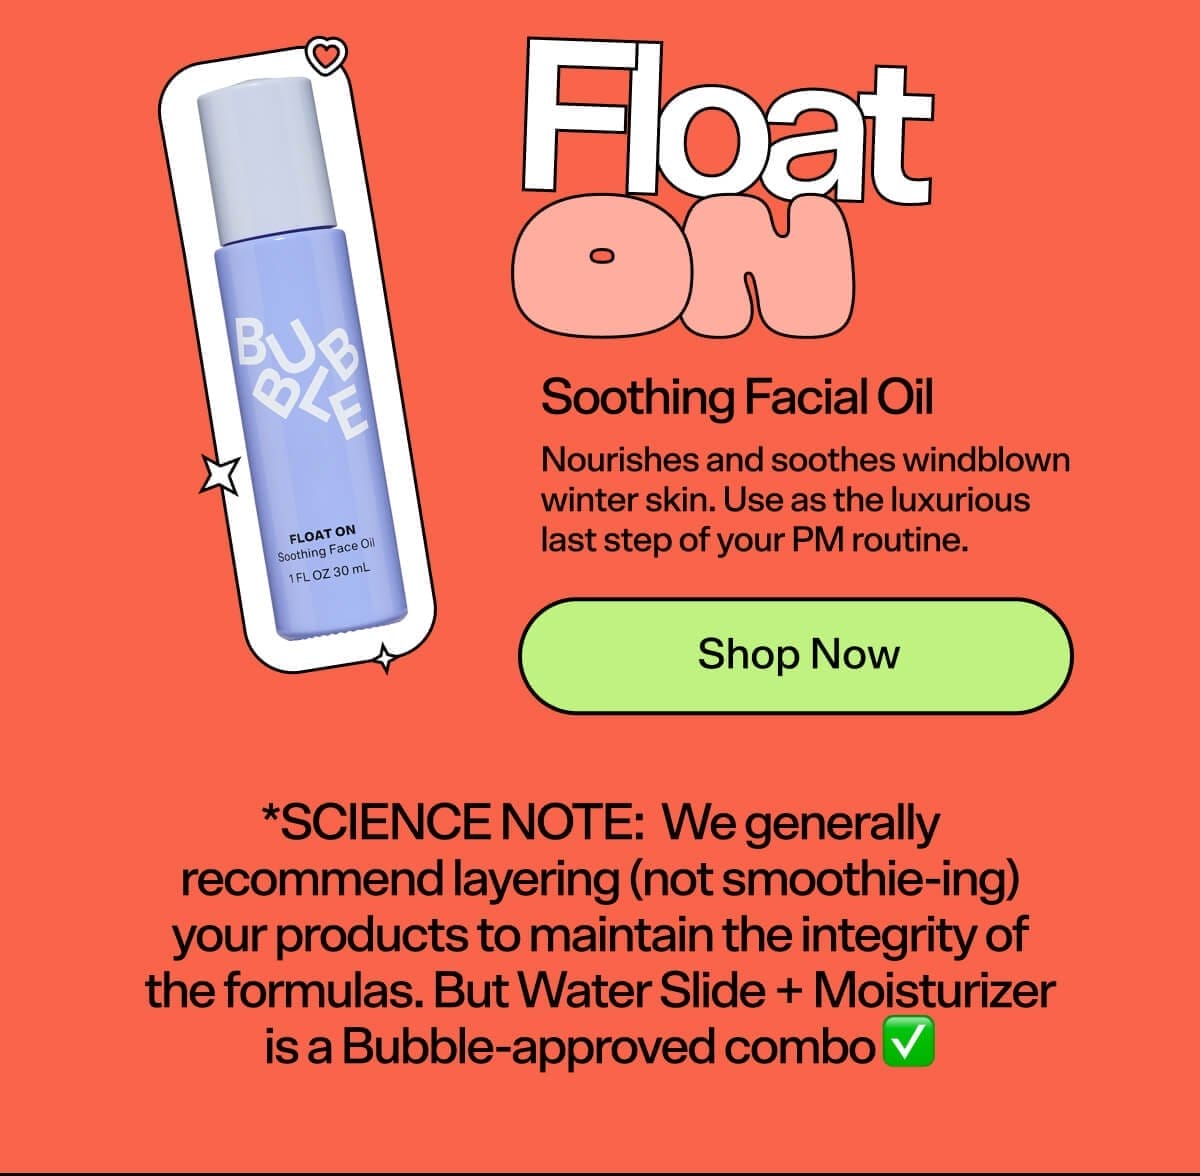 Float On Soothing Facial Oil [Shop Now] Nourishes and soothes windblown winter skin. Use as the luxurious last step of your PM routine! *SCIENCE NOTE: We generally recommend layering (not smoothie-ing) your products to maintain the integrity of the formulas. But Water Slide + Moisturizer is a Bubble-approved combo ✅.